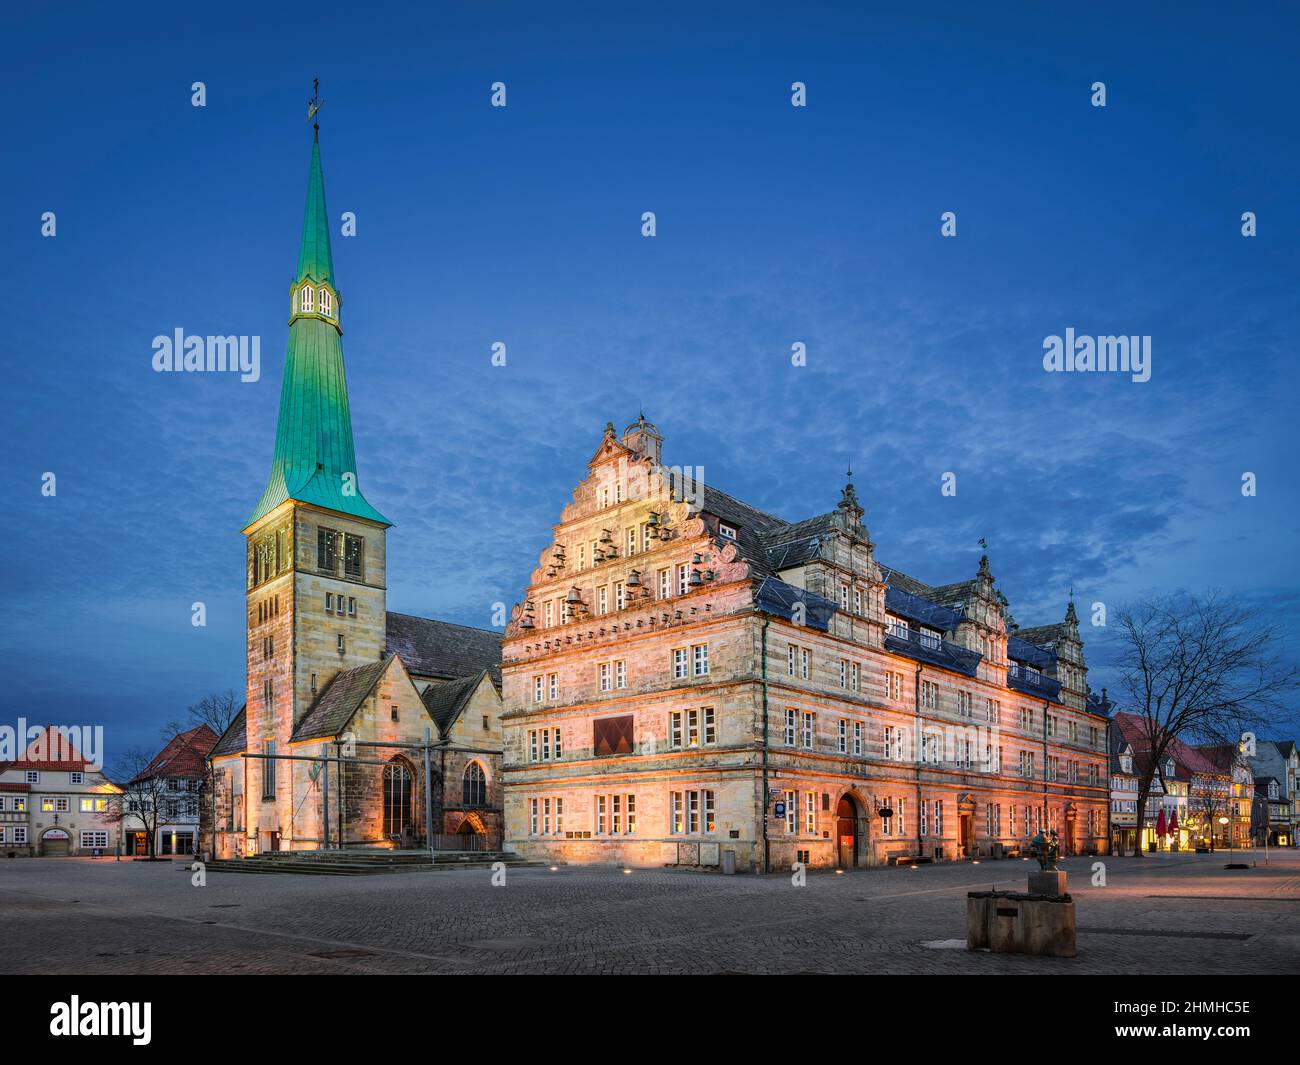 Old town of Hamelin, Germany at night with the famous Hochzeitshaus building Stock Photo